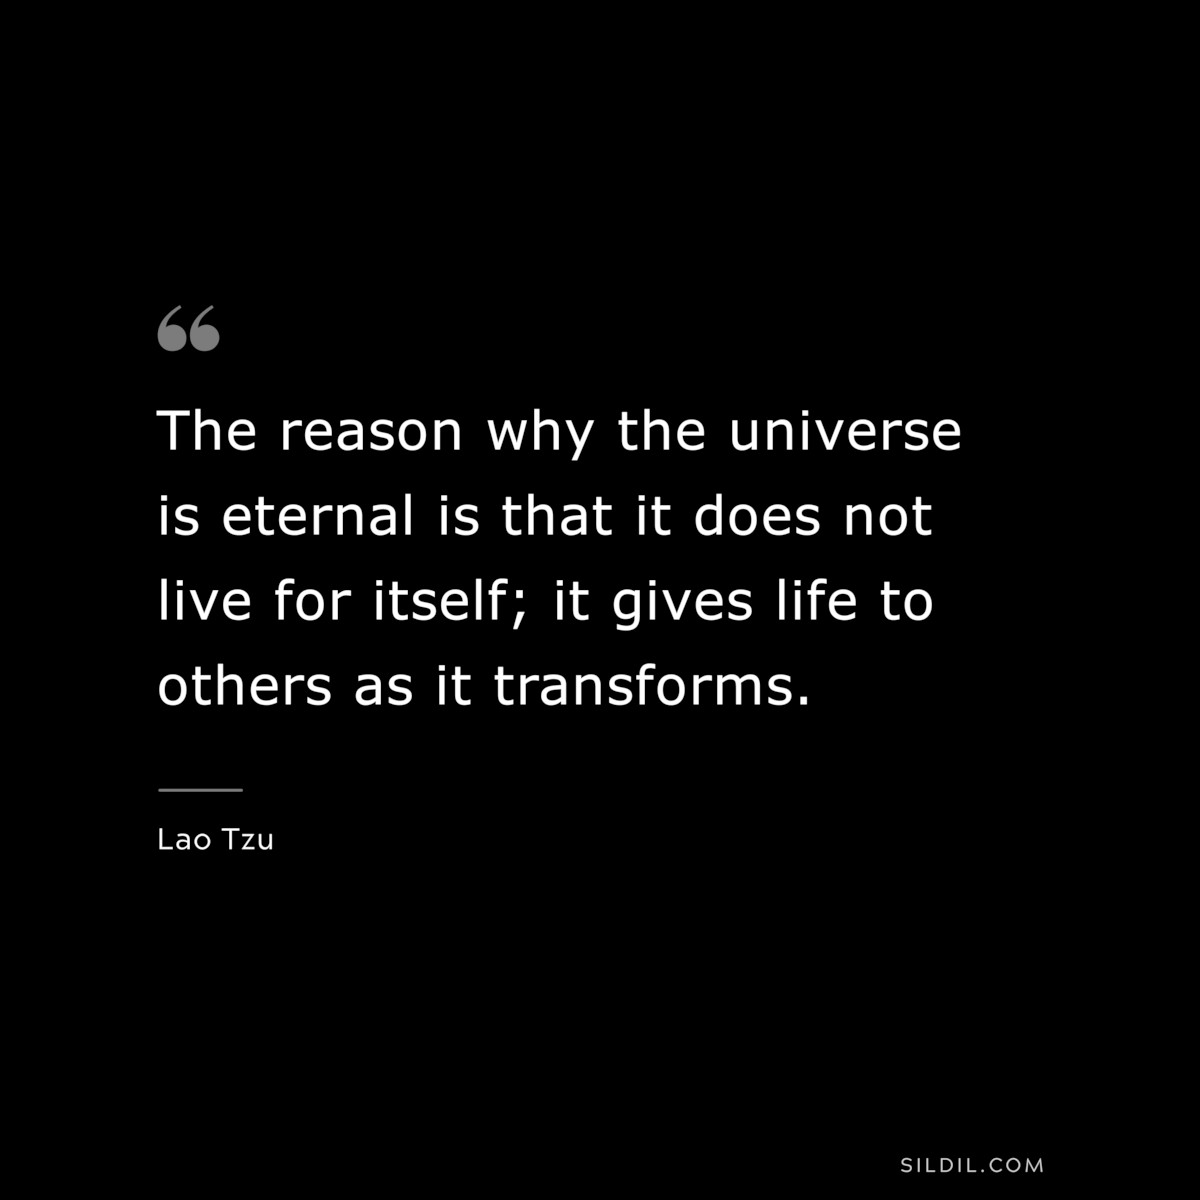 The reason why the universe is eternal is that it does not live for itself; it gives life to others as it transforms. ― Lao Tzu